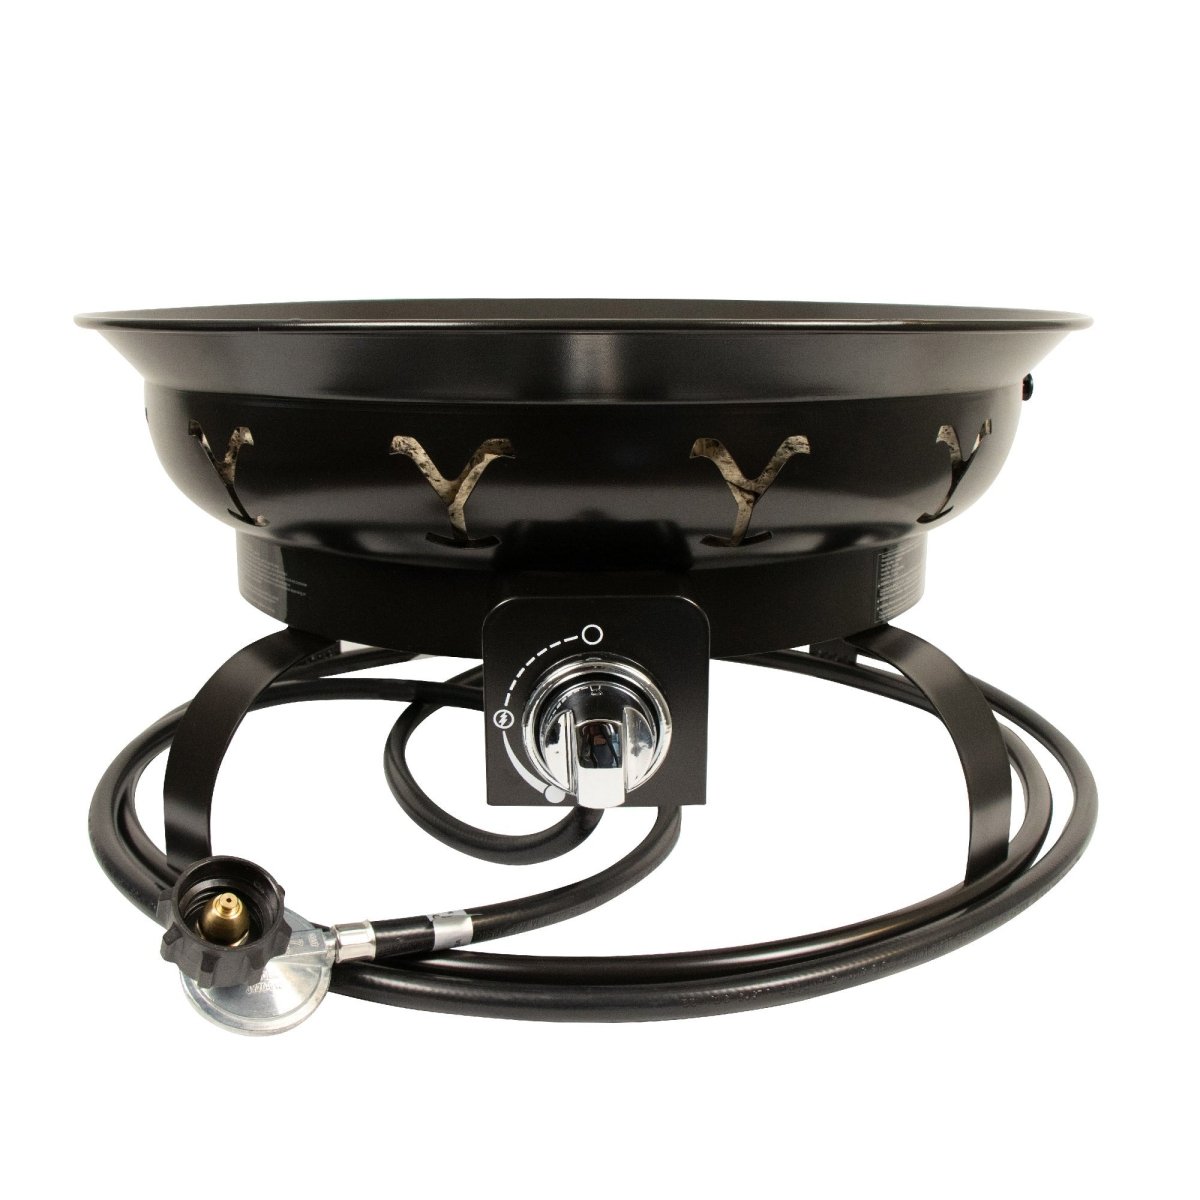 Yellowstone Gas Fire Bowl - Alpine Outlets